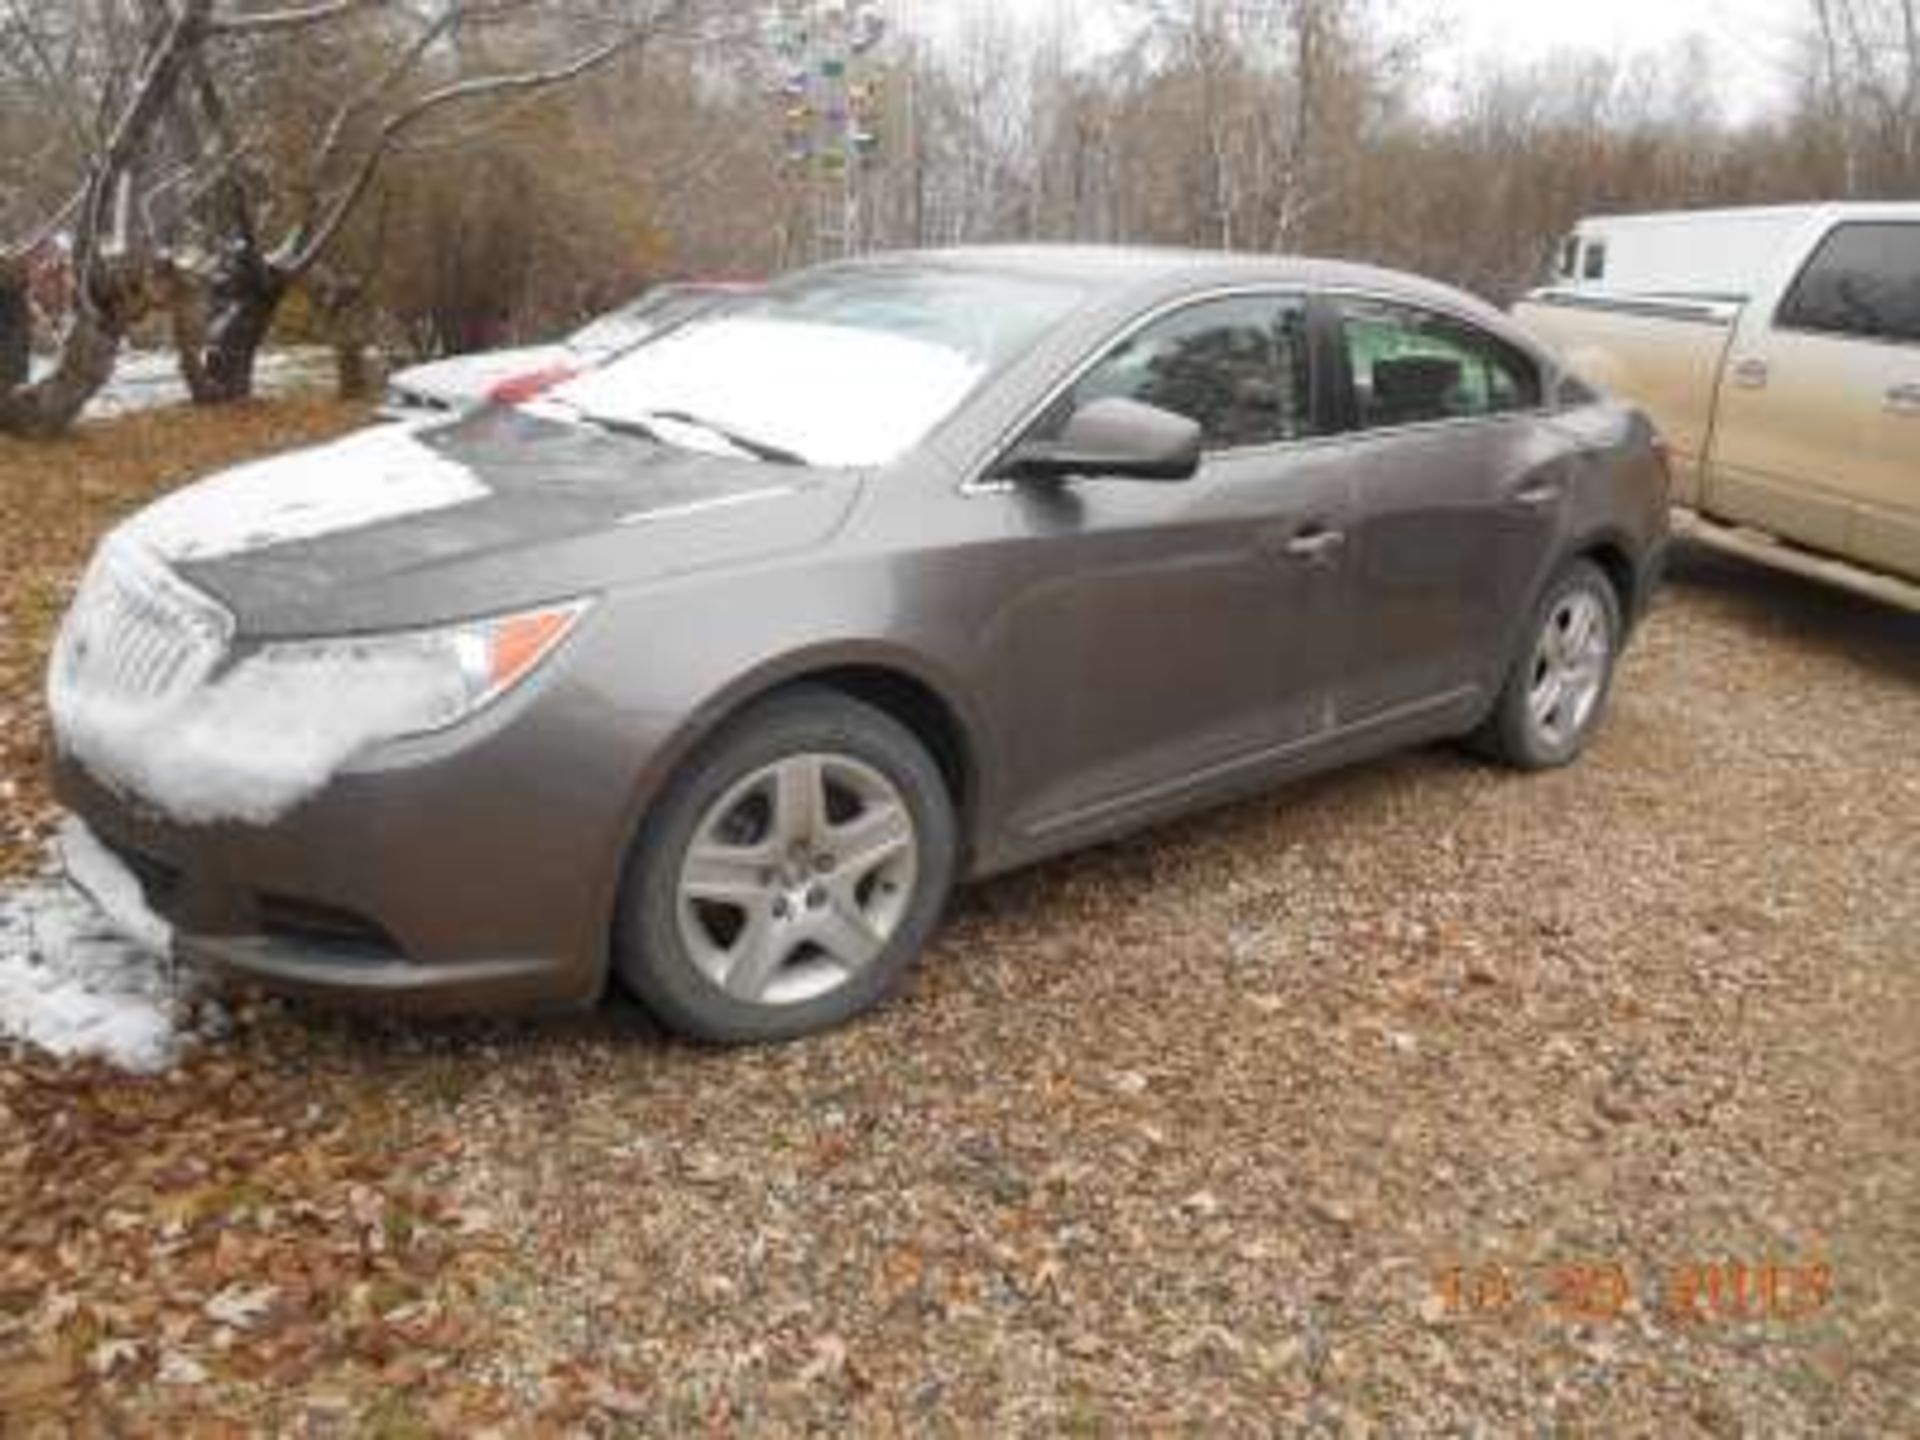 2010 Buick Lacrosse: 4cyl, fully loaded, auto, low km new rubber